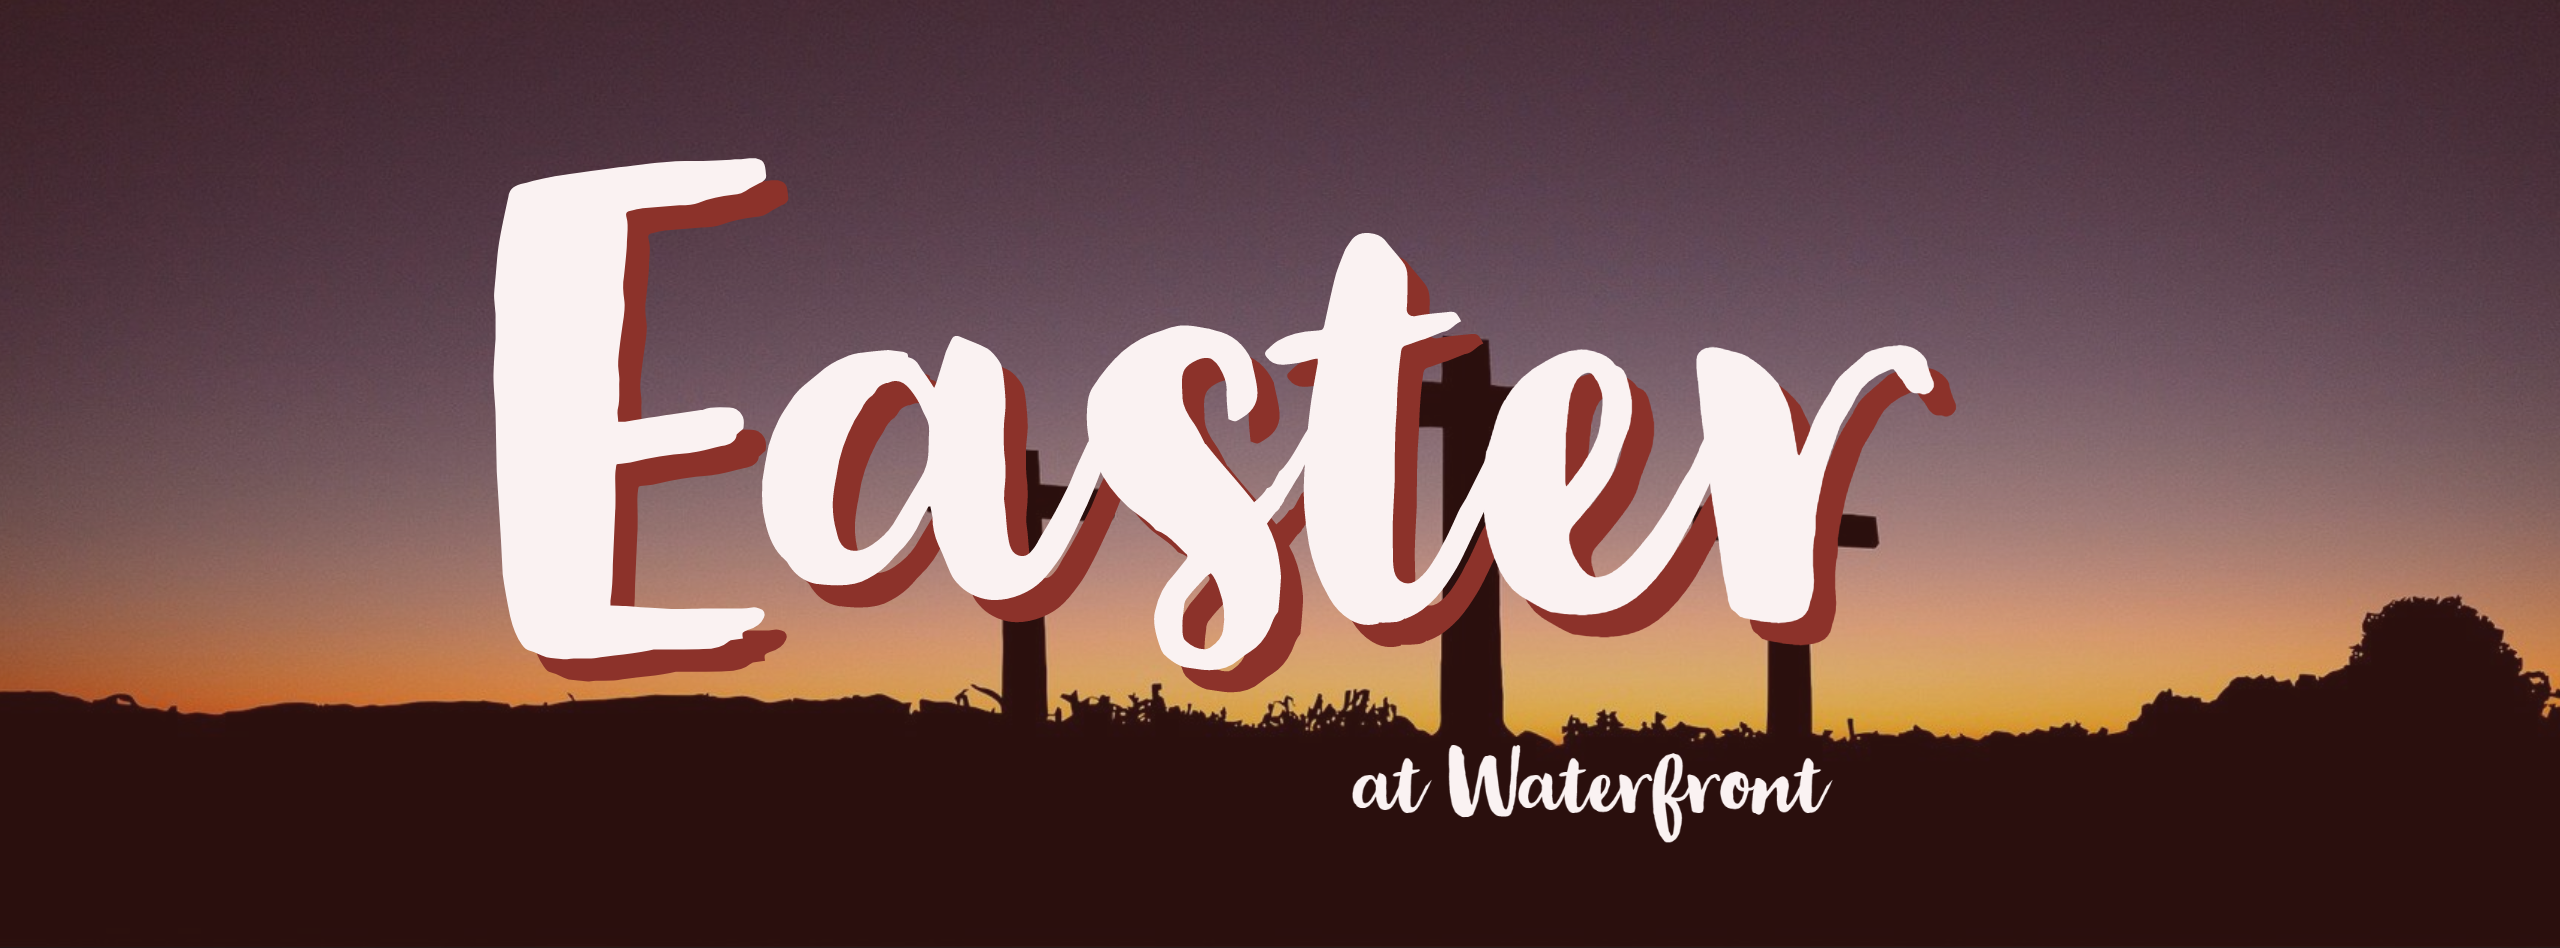 Waterfront Community Church | Easter at Waterfront